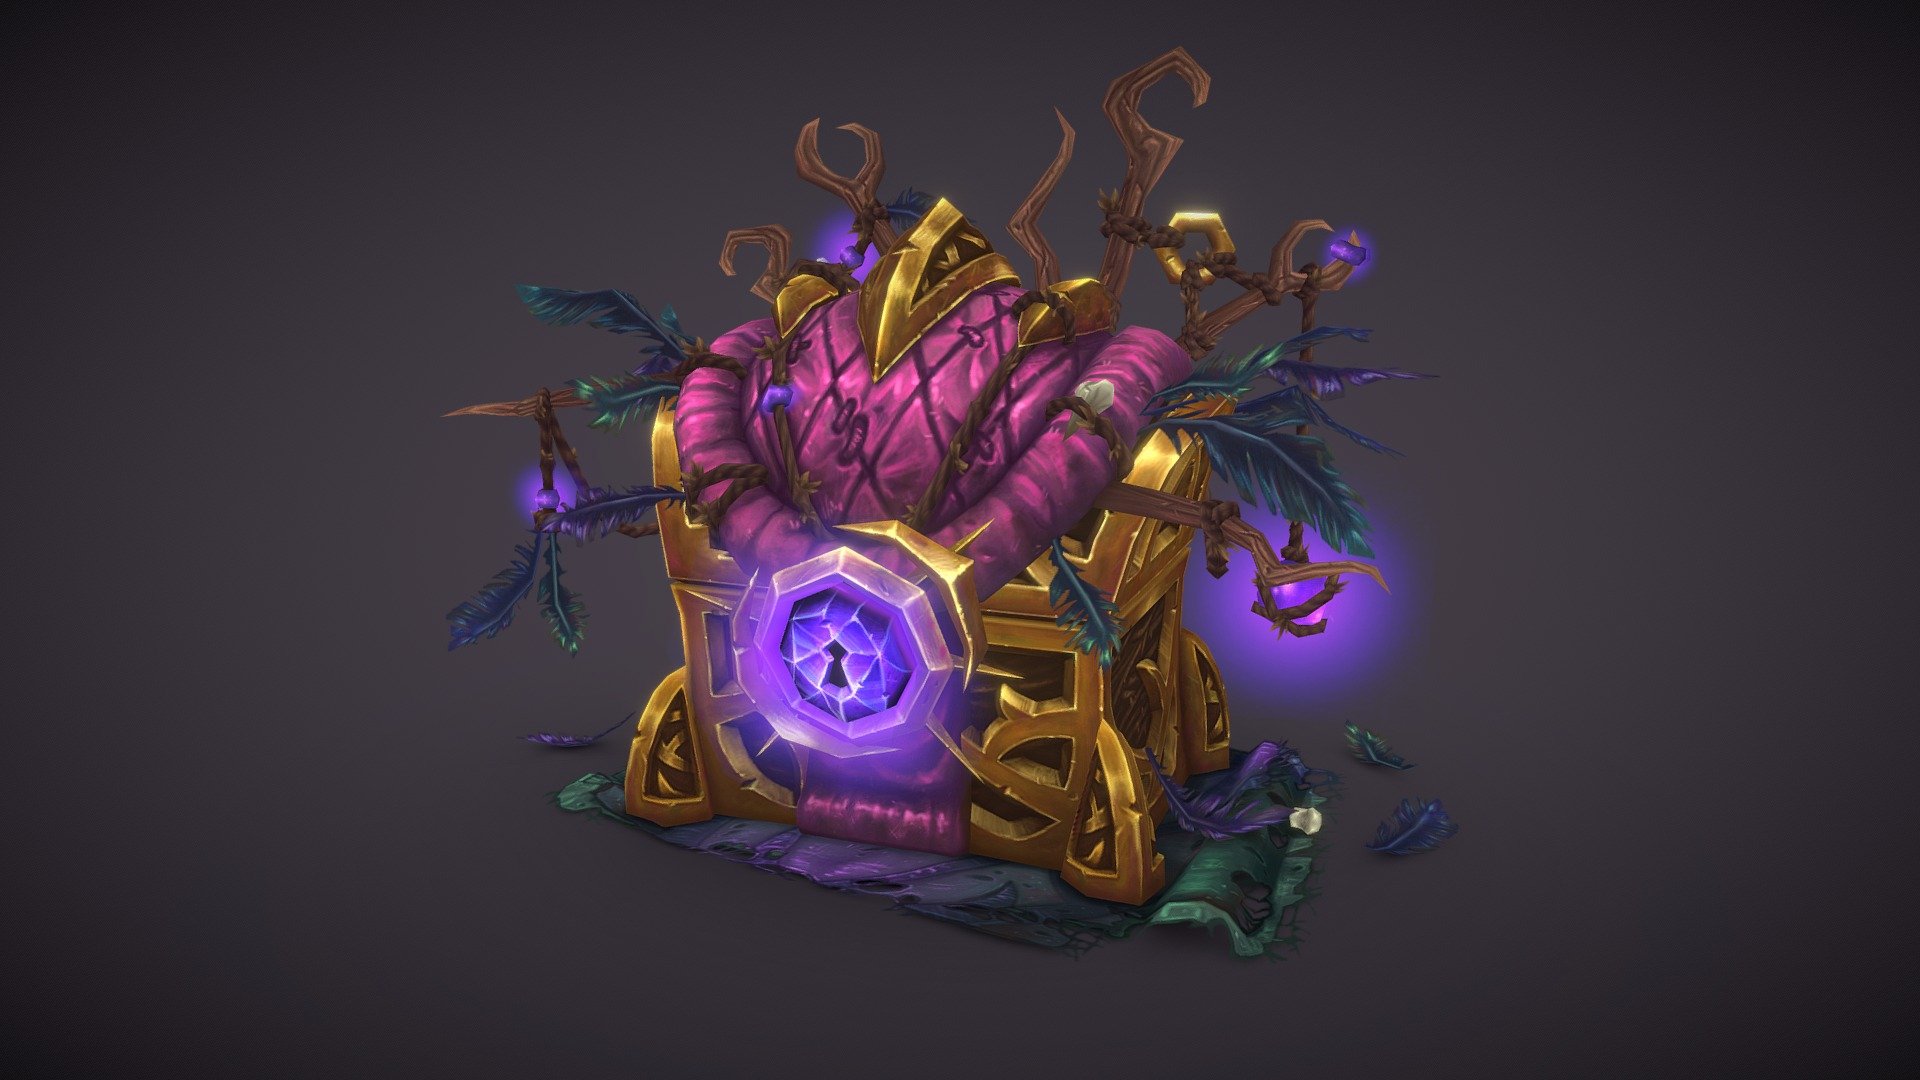 I'm so excited to share this prop I worked on over the past 8+weeks in the Brushforge Aeon Core mentorship with Jordan Powers. I love the Arakkoa Outcasts from WoW and I'm really glad I got to explore their aesthetic with this project. It was a definitely a challenge, but I learned so much.

Check out my project on artstation:
https://www.artstation.com/artwork/qA3BNe - Arakkoa Treasure Chest - 3D model by DeSiena (@funosaurus) 3d model